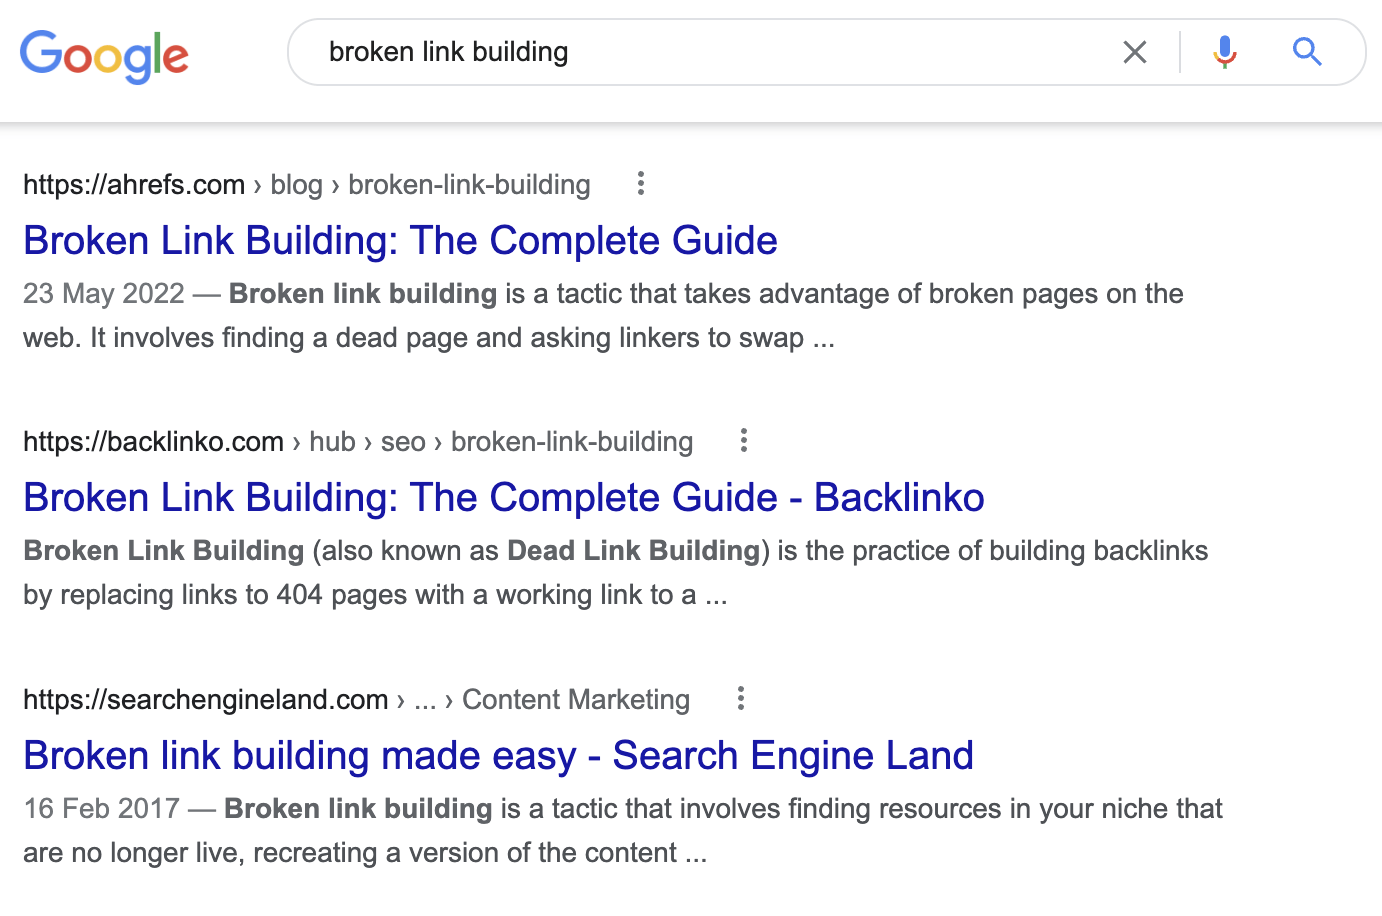 People searching for "broken link building" want to learn
